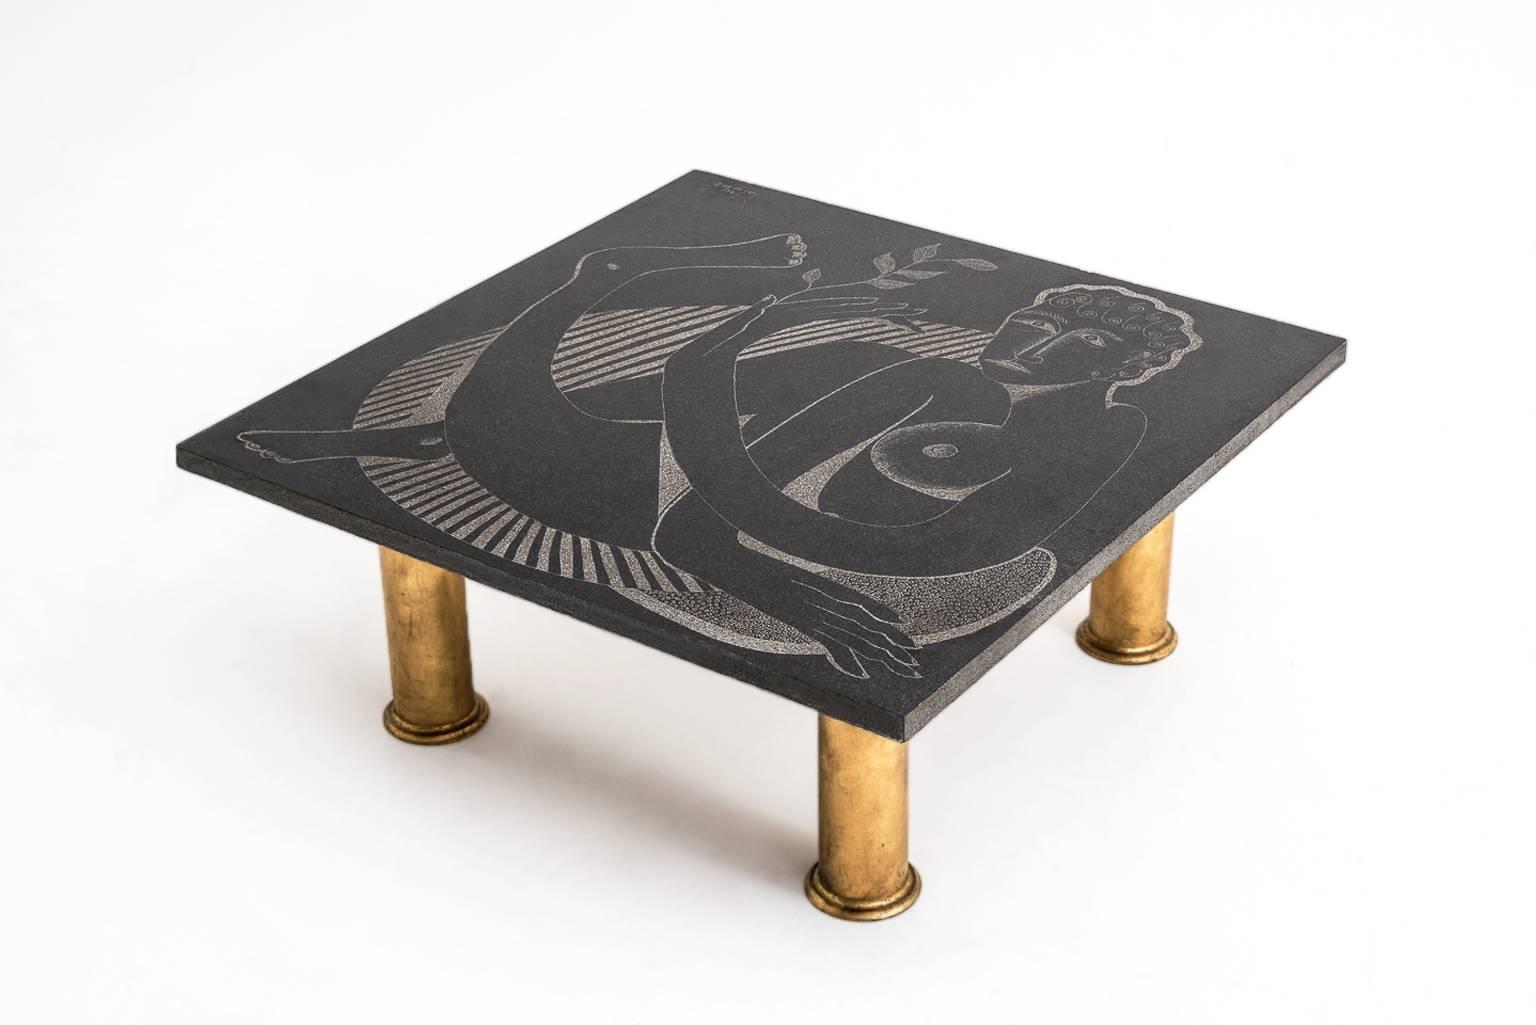 Granite coffee table by artist Guy de Jong. De Jong is born in Brussels in 1945 he studied at the Royal Academy of Fine arts. De Jong lives and works in a small village in the beautiful mountains above the Lake Como. The top of the table is made